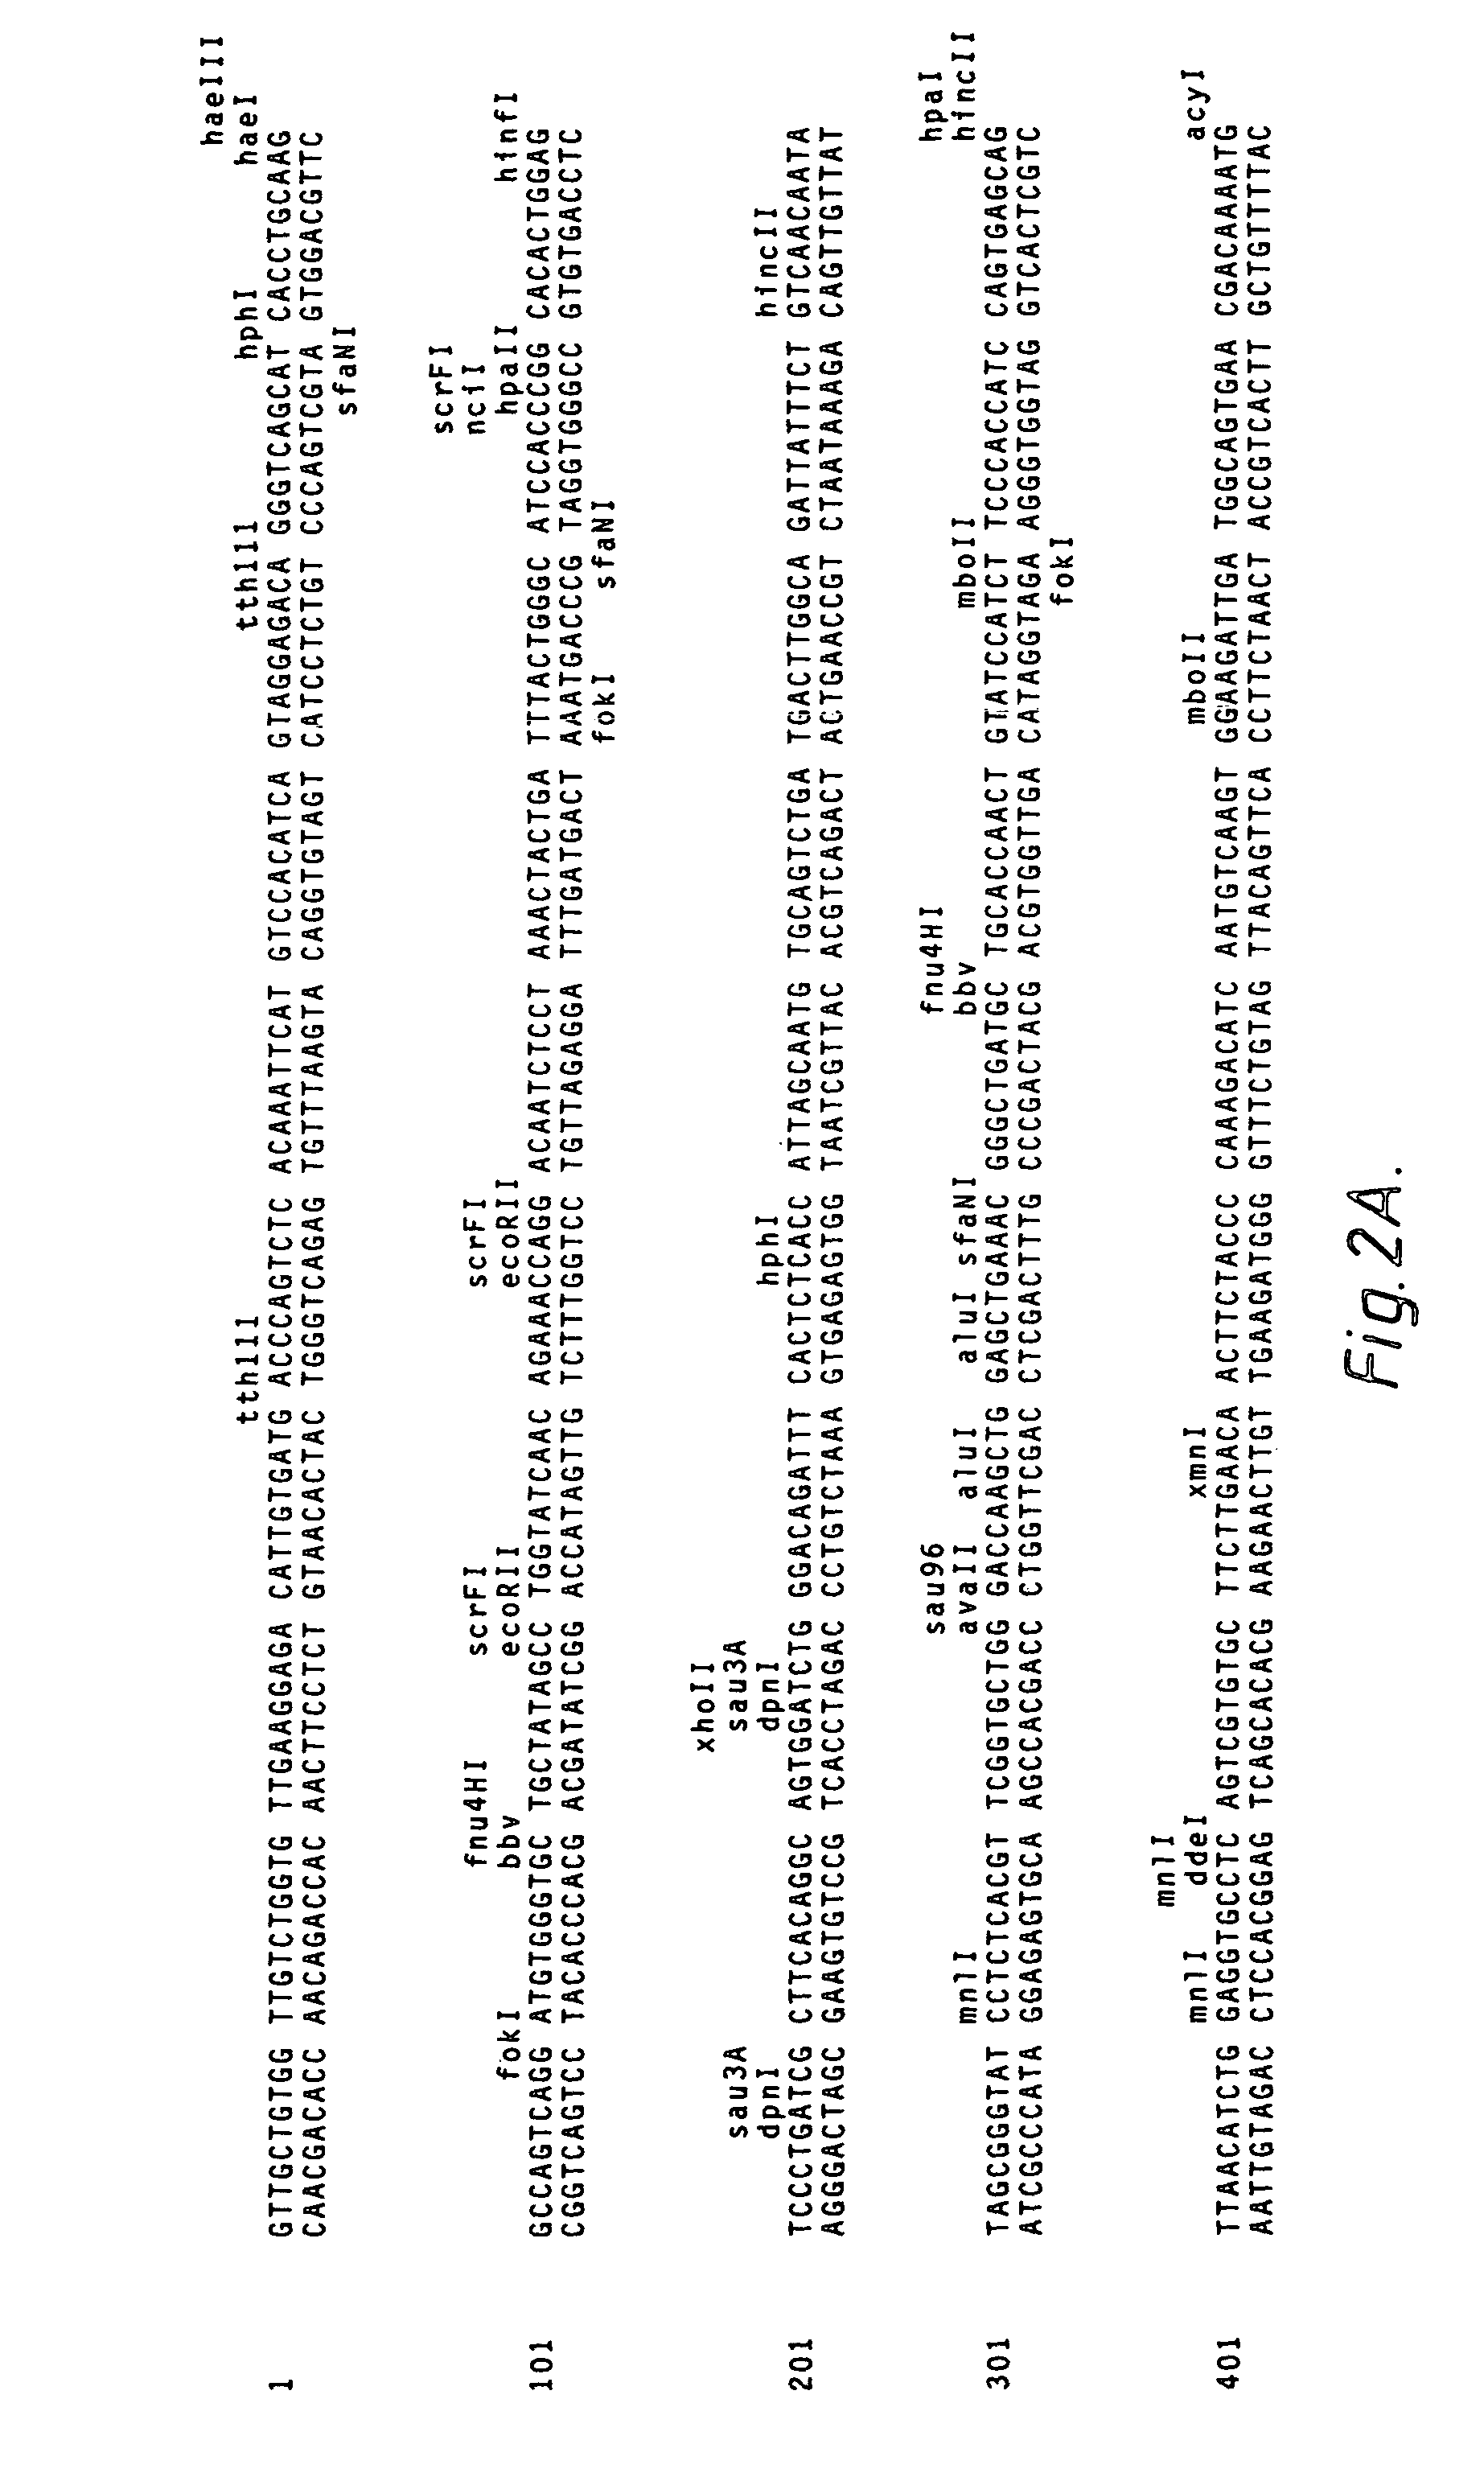 Methods of making antibody heavy and light chains having specificity for a desired antigen